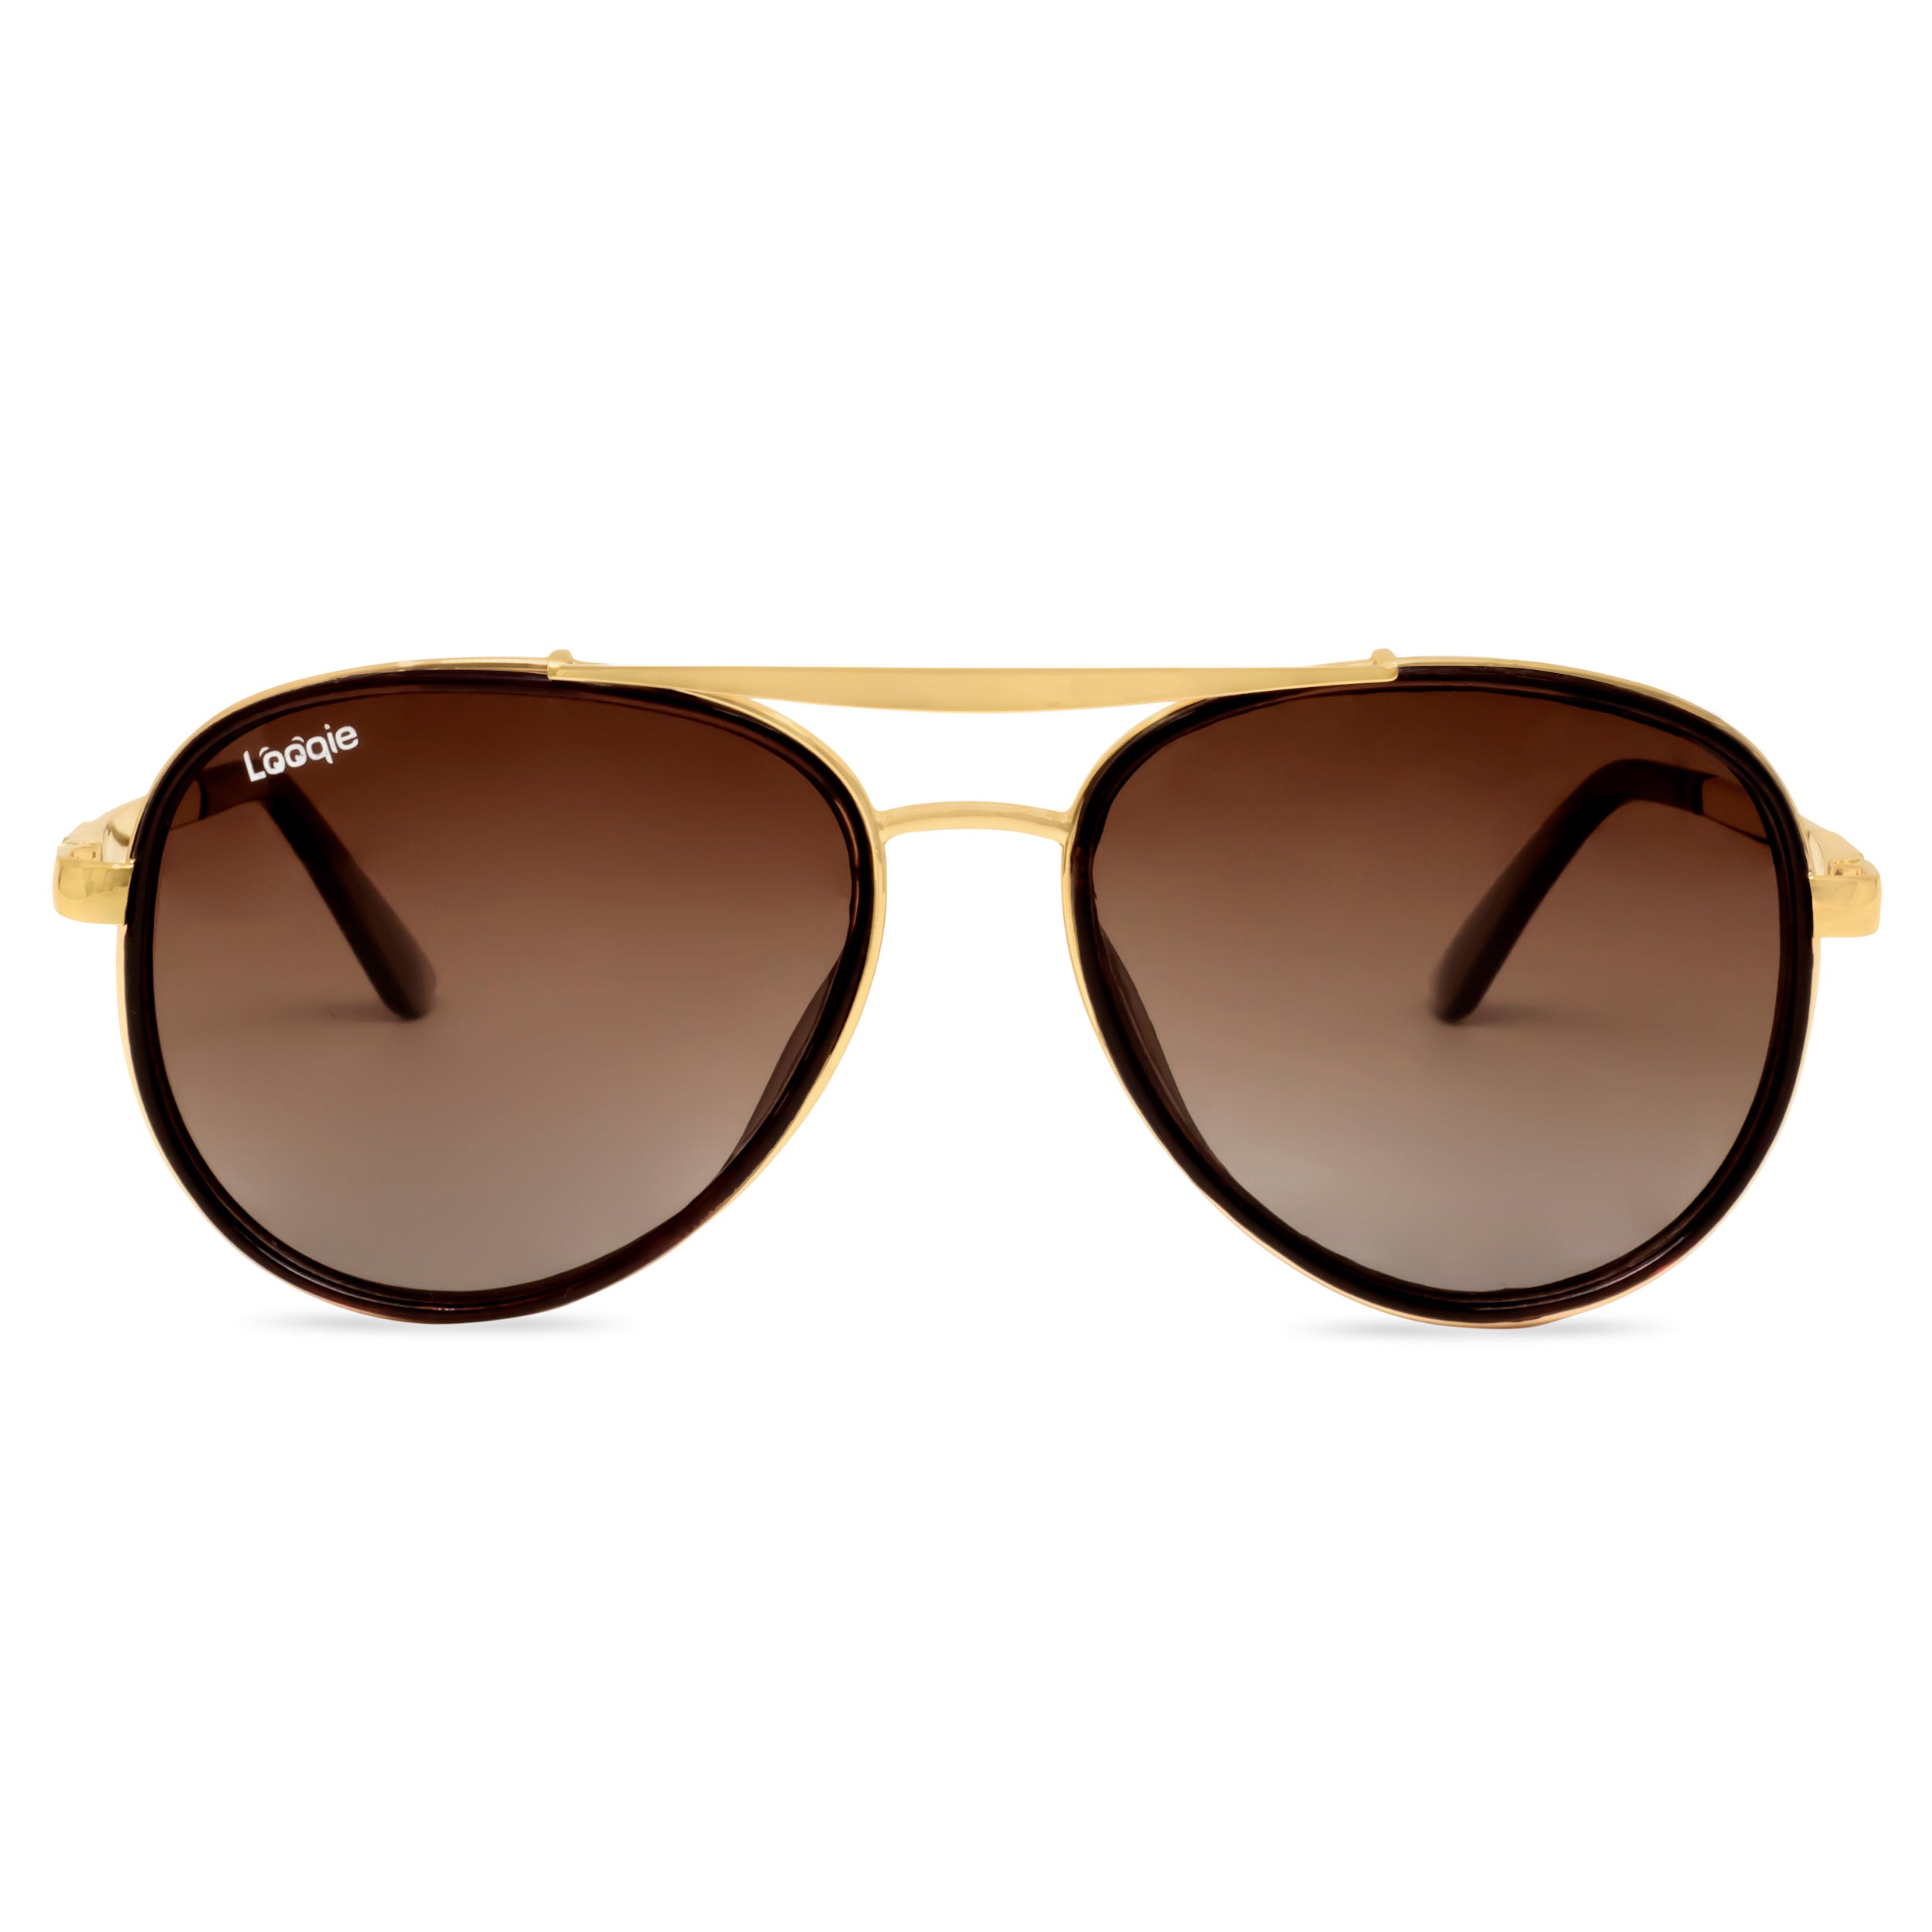 Mens Original Aviator 62 mm Gold Sunglasses from Ray Ban 805289305040 |  World of Watches